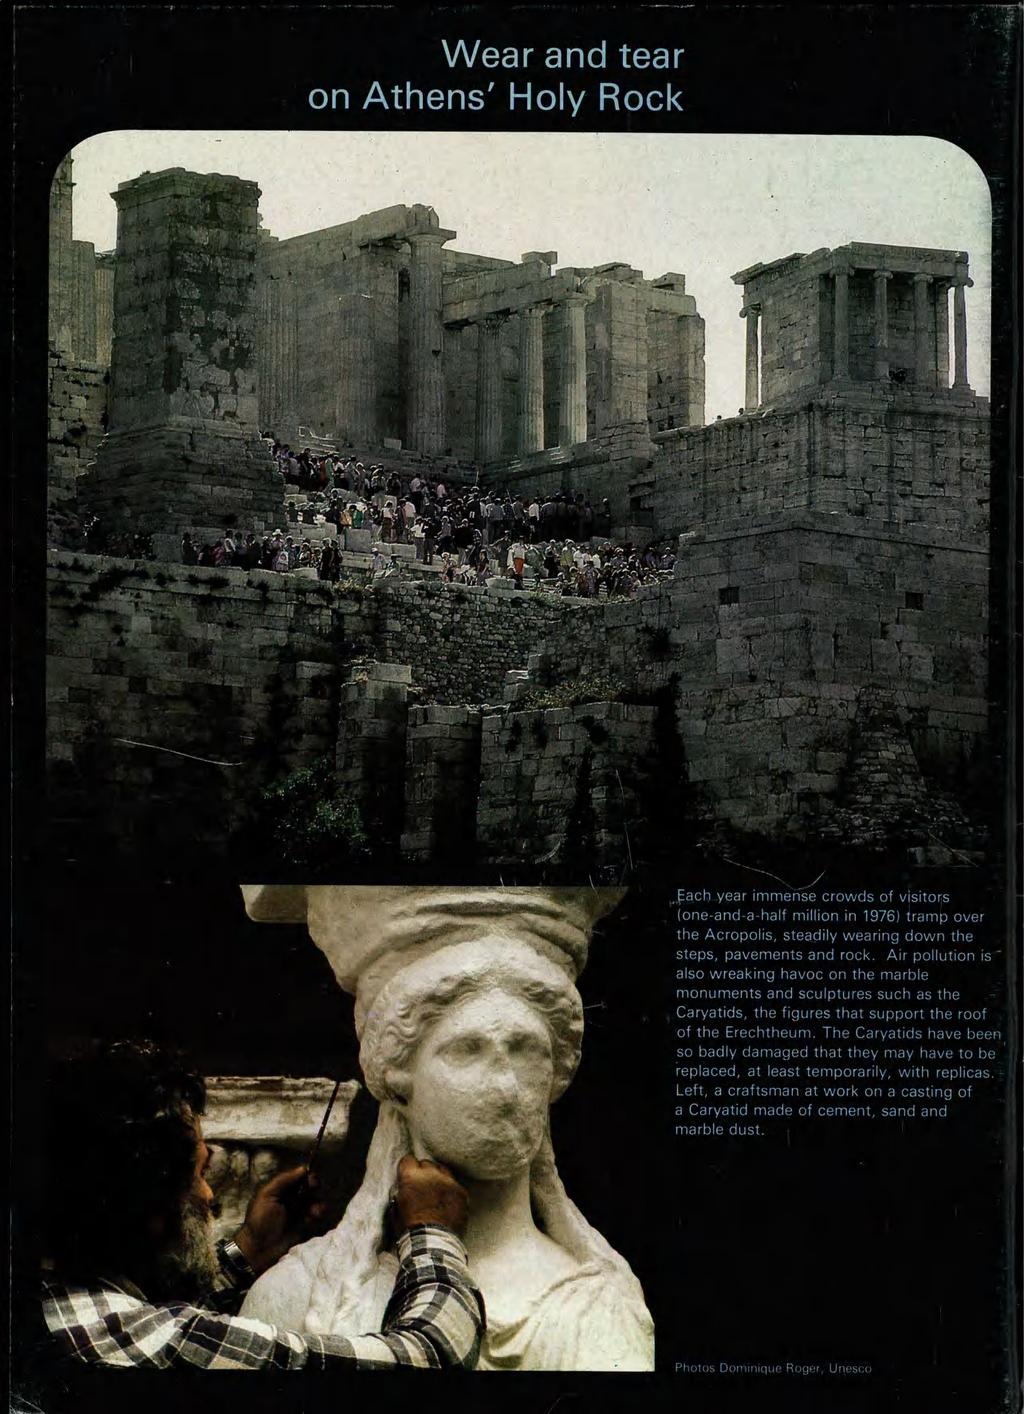 Wear and tear on Athens' Holy Rock «m. year immense crowds of visitors (one-and-a-half million in 1976) tramp over the Acropolis, steadily wearing down the steps, pavements and rock.